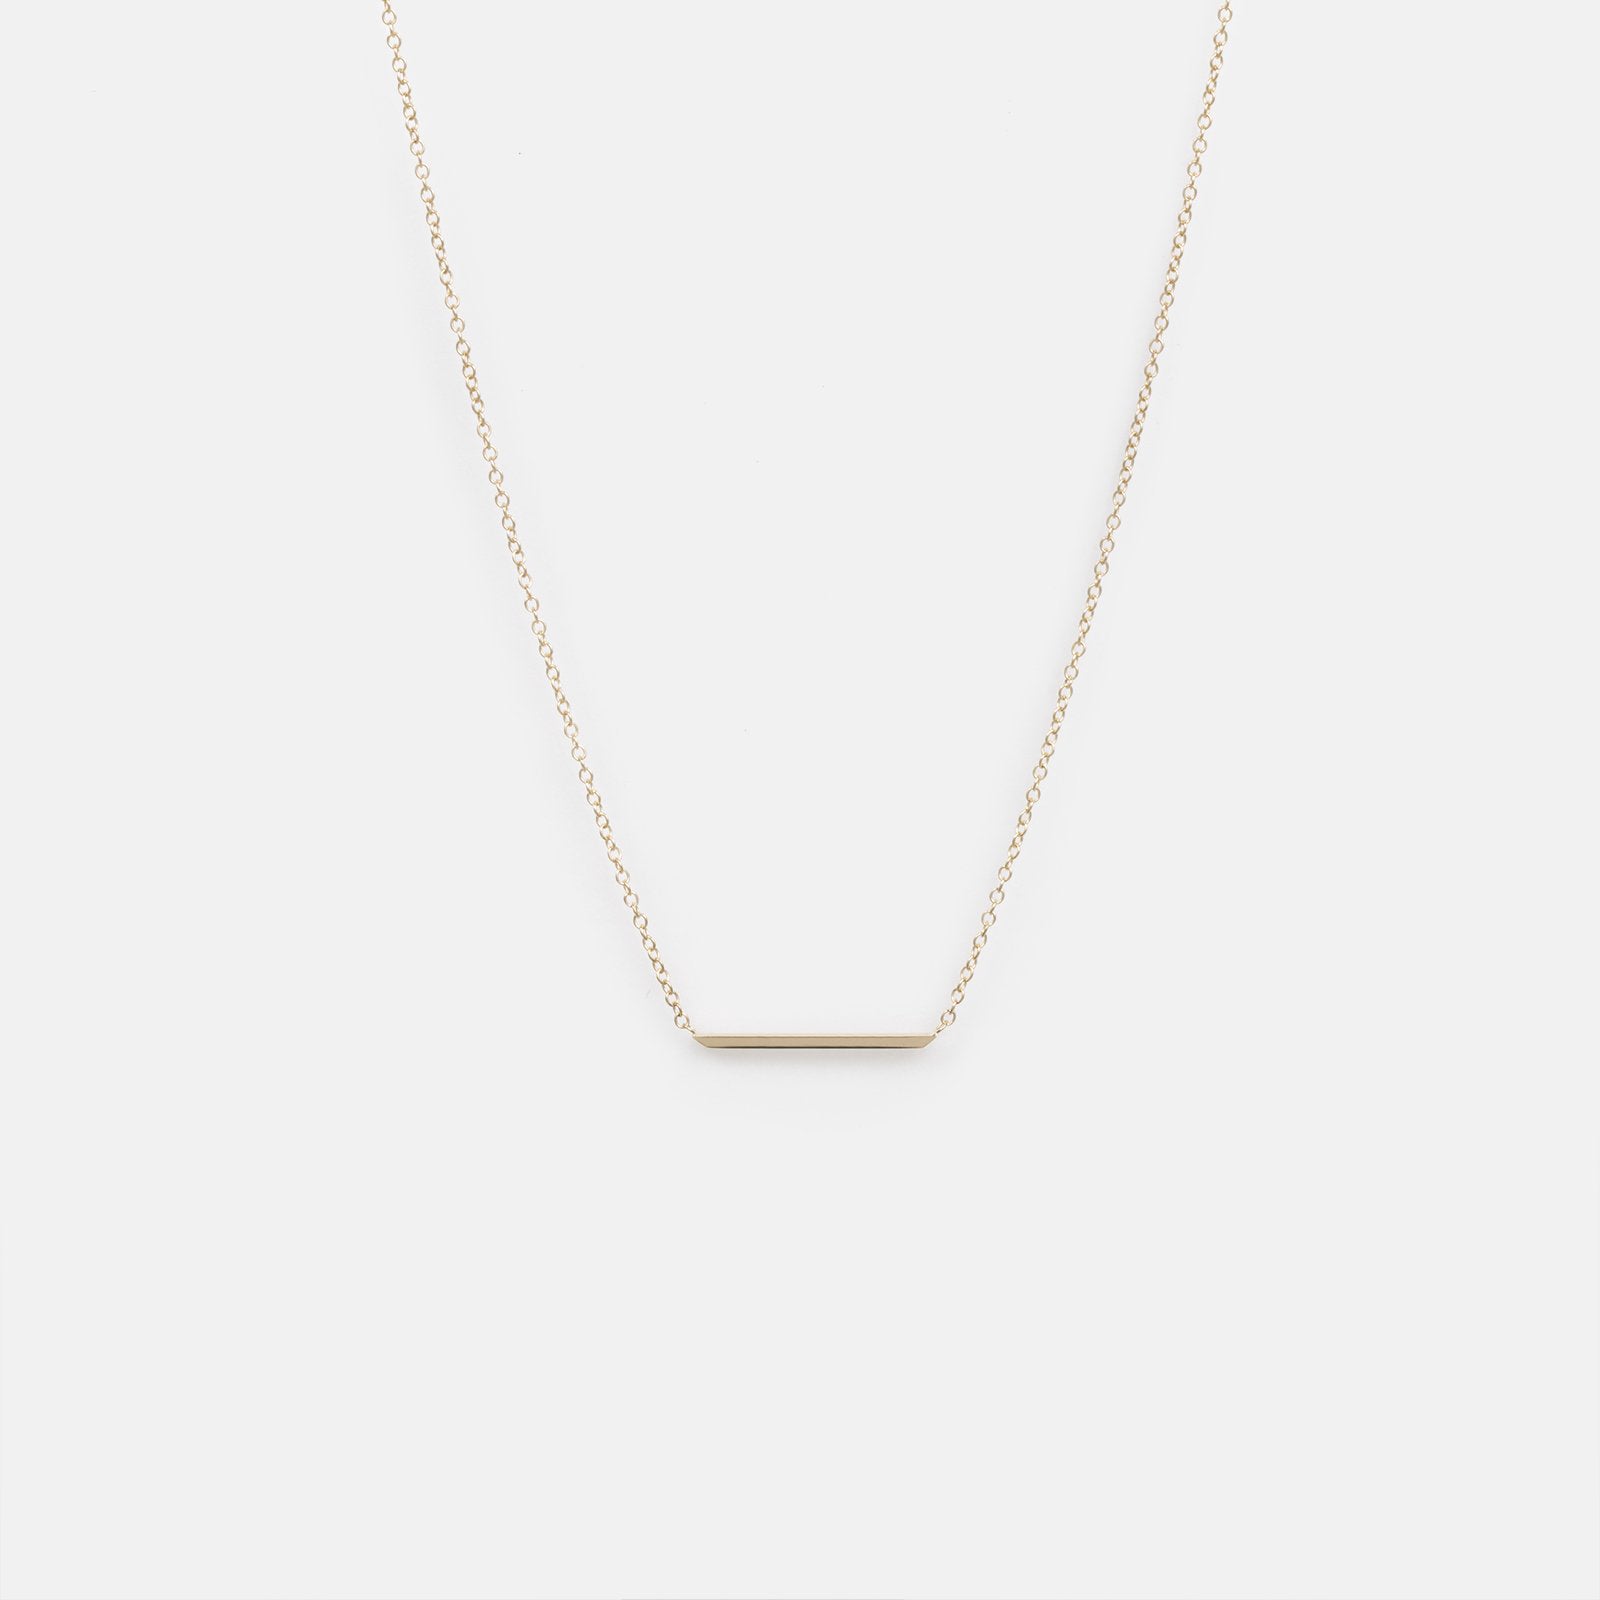 Delicate Vati Necklace in 14k Yellow Gold by SHW Fine Jewelry Made in New York City